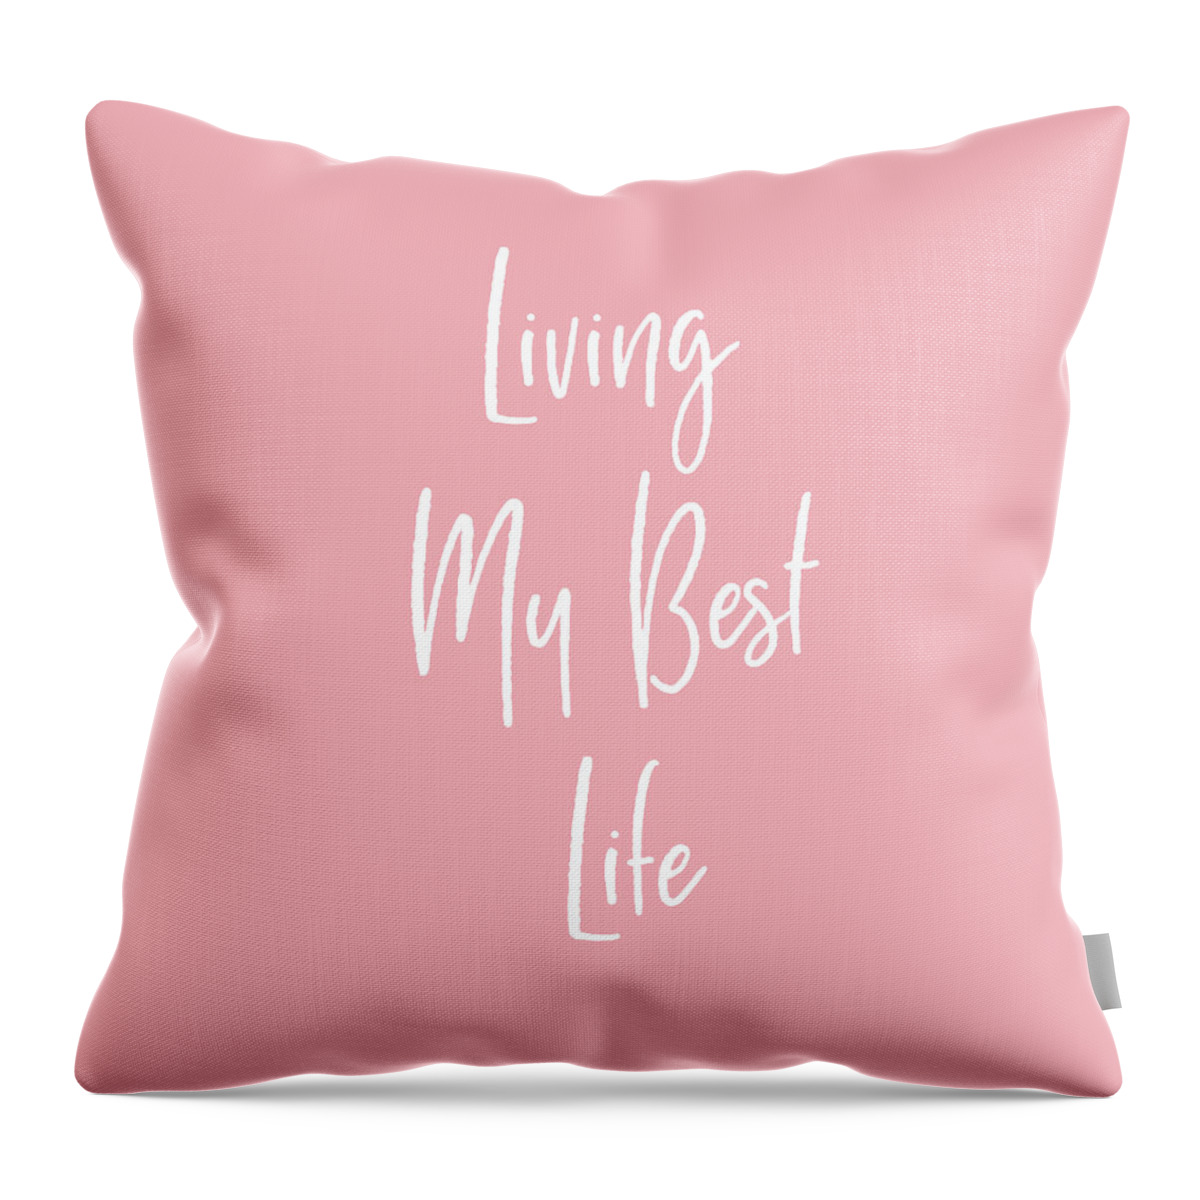 Life Throw Pillow featuring the digital art Living My Best Life- Art by Linda Woods by Linda Woods